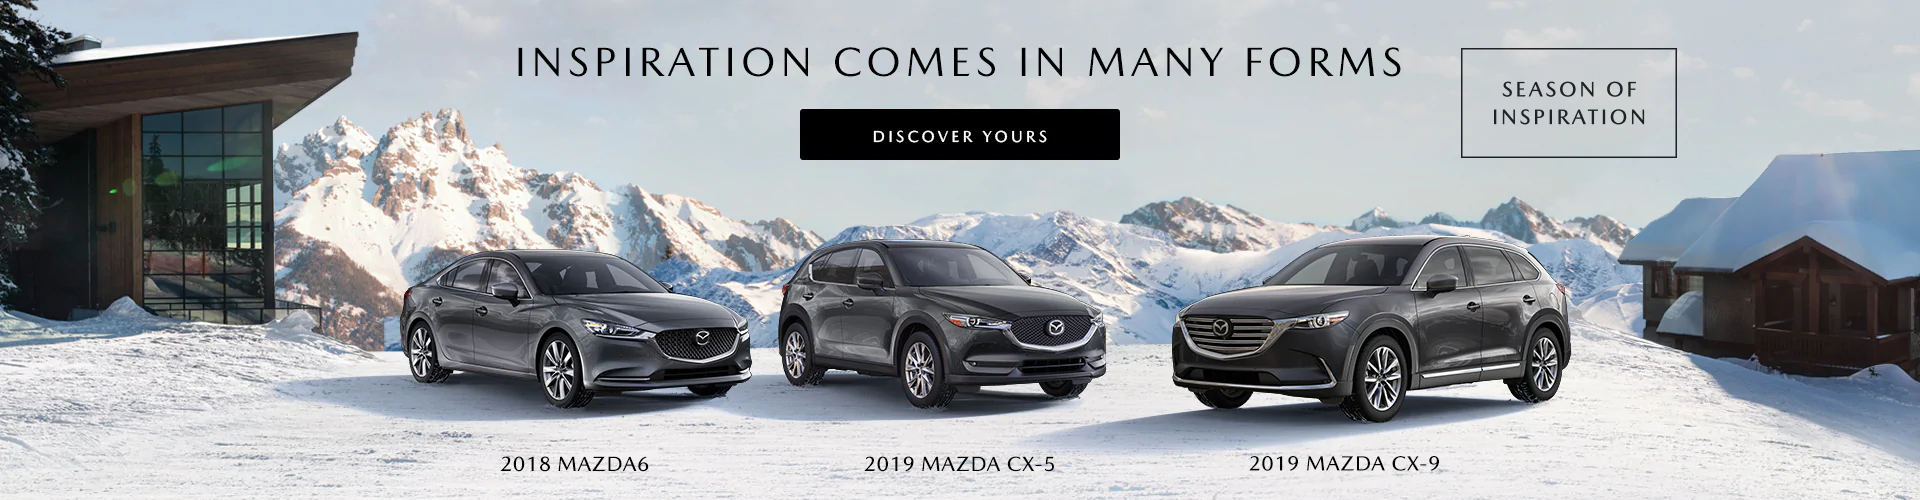 Image of three Mazda vehicles parked in front of a snowy, mountain backdrop.